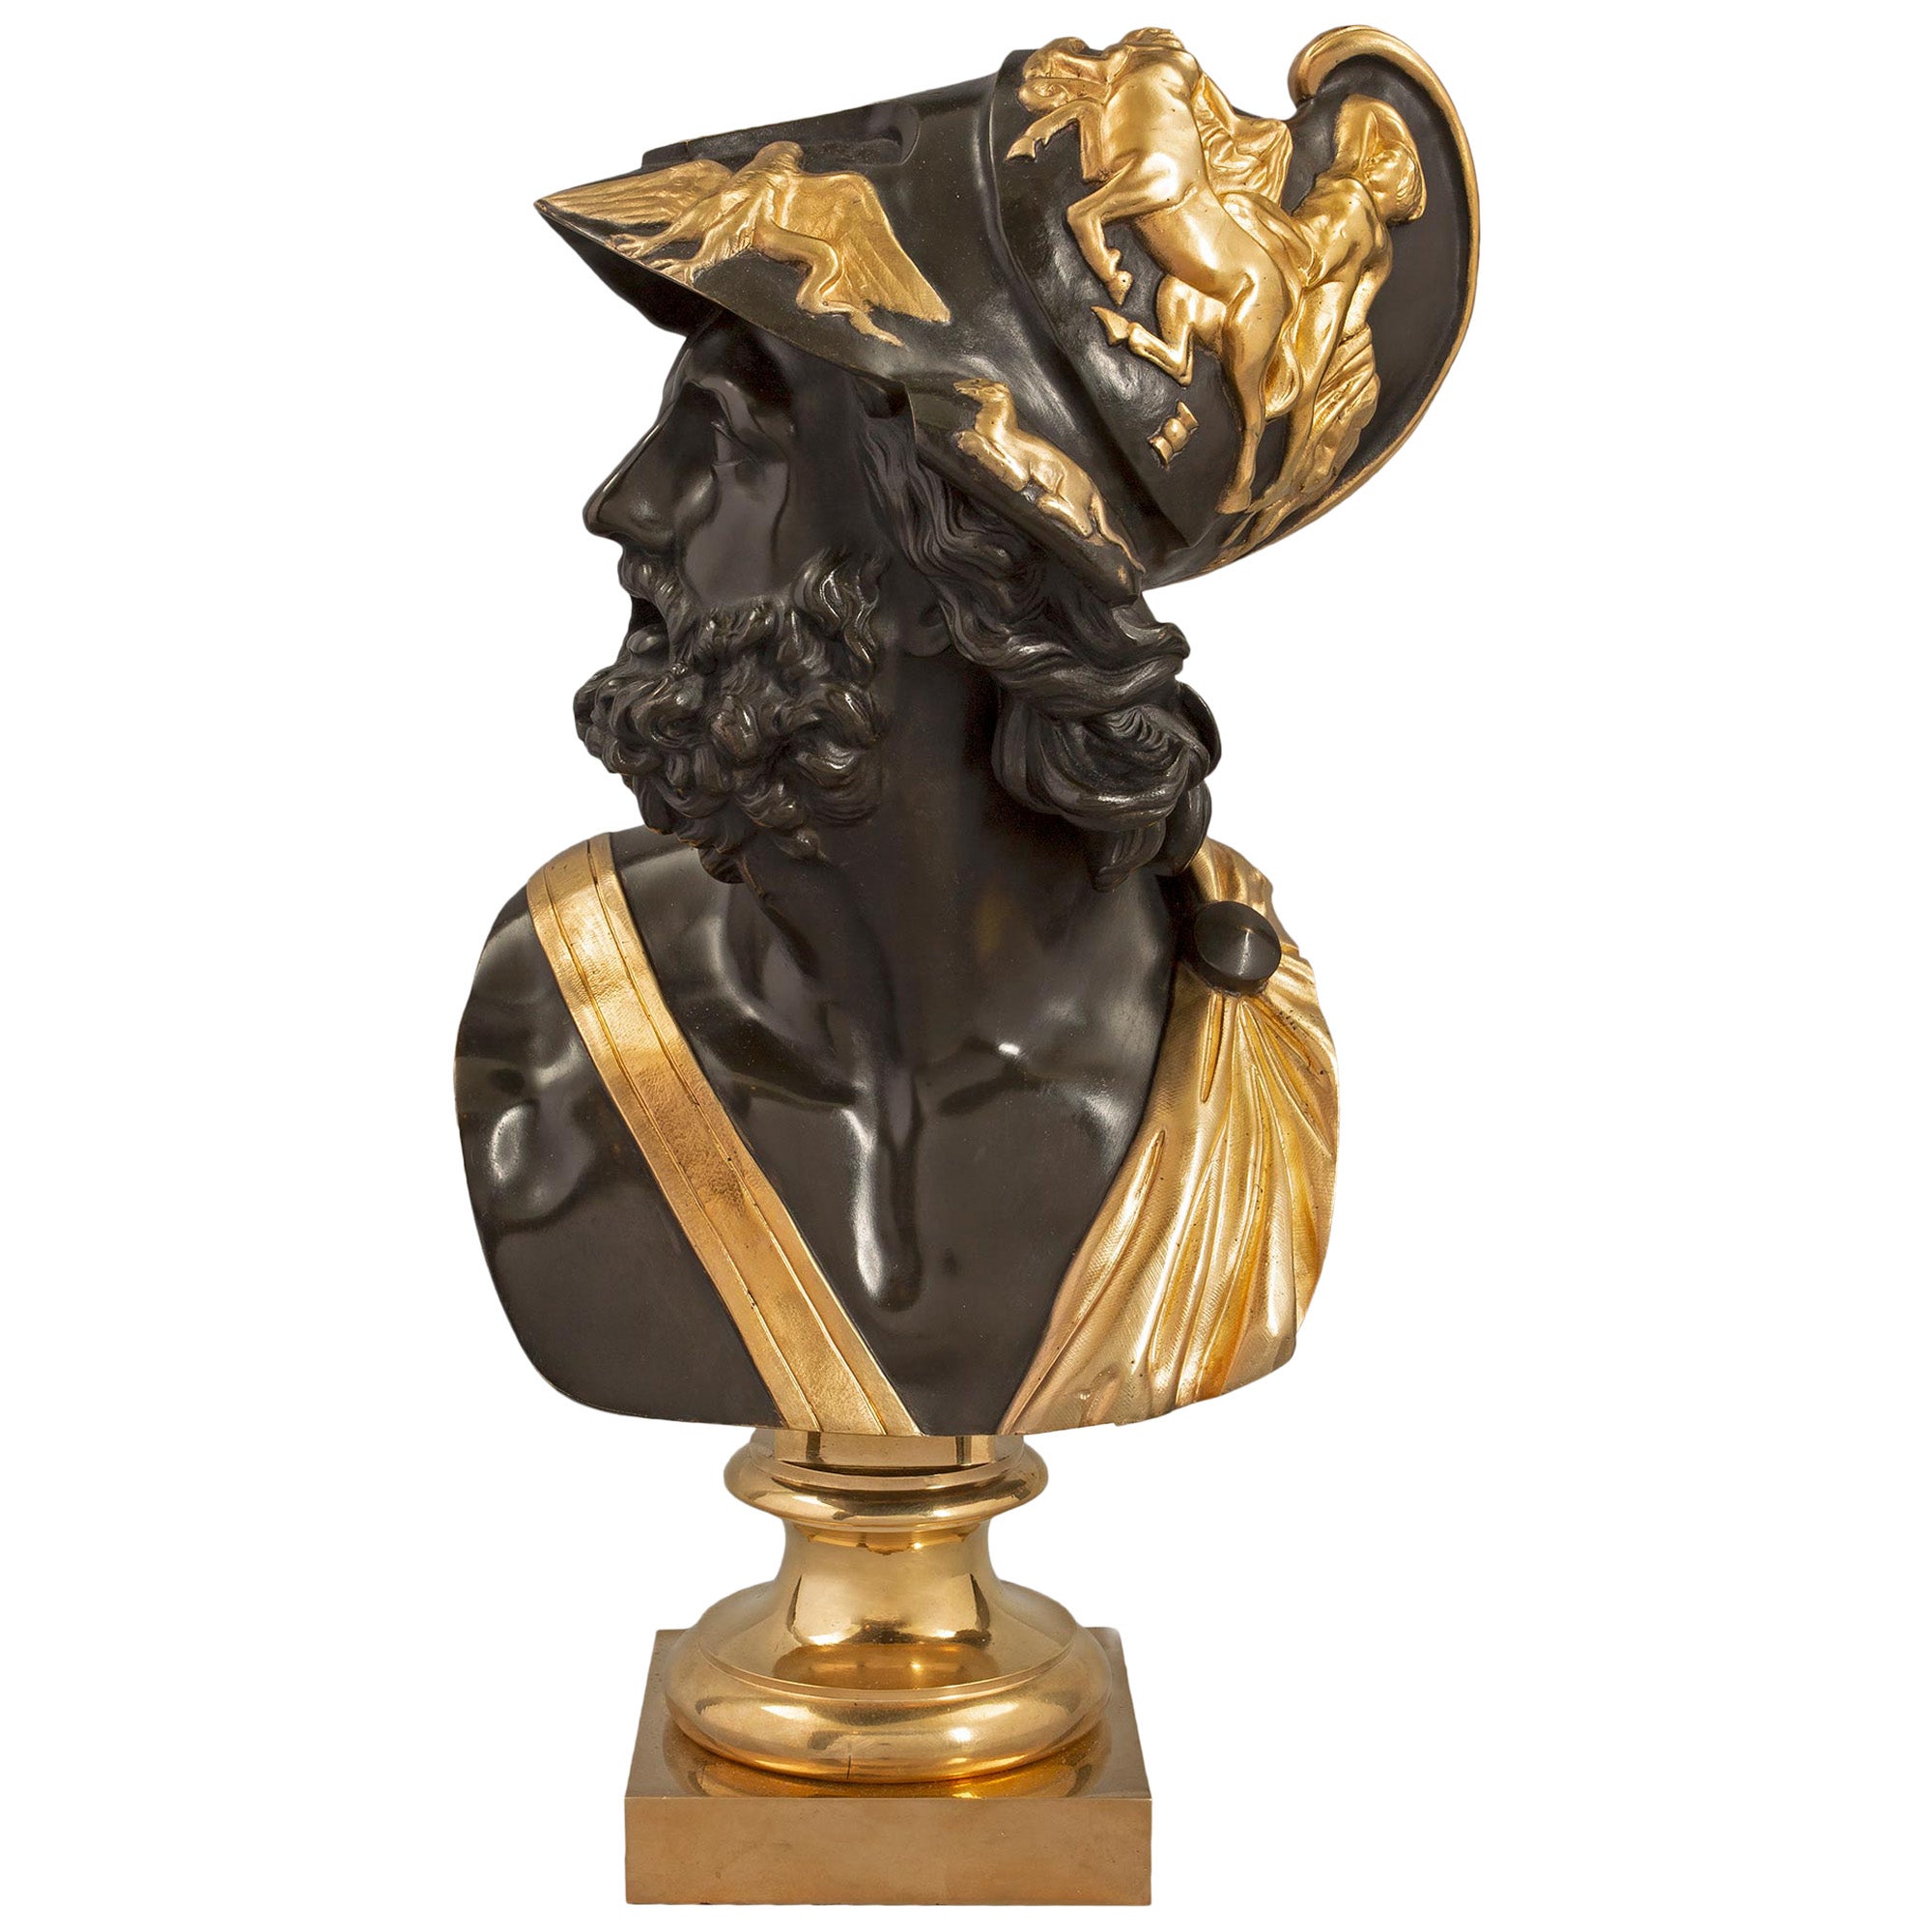 French 19th Century Louis XVI Style Patinated Bronze and Ormolu Bust of Menelaus For Sale